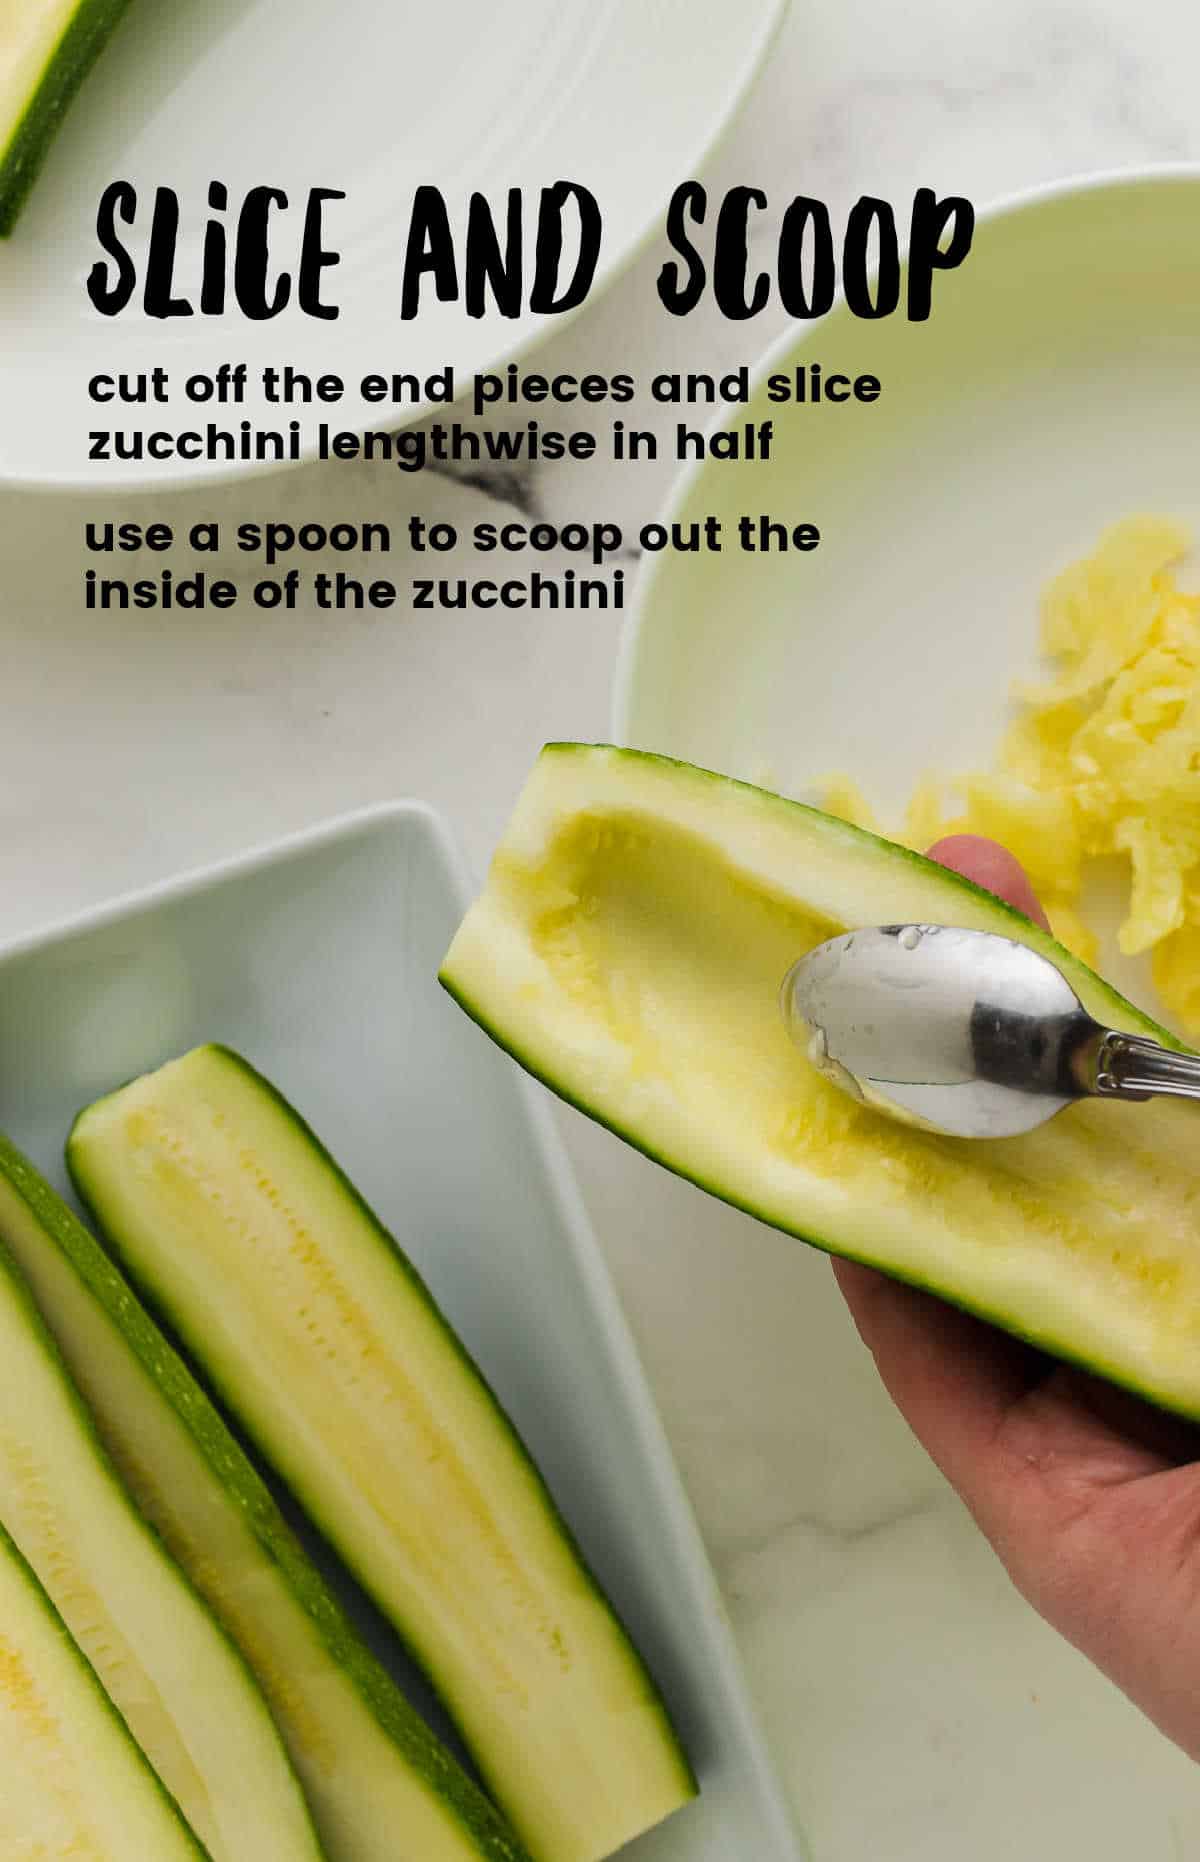 Process Step: Removing the inside flesh of the zucchini with a spoon